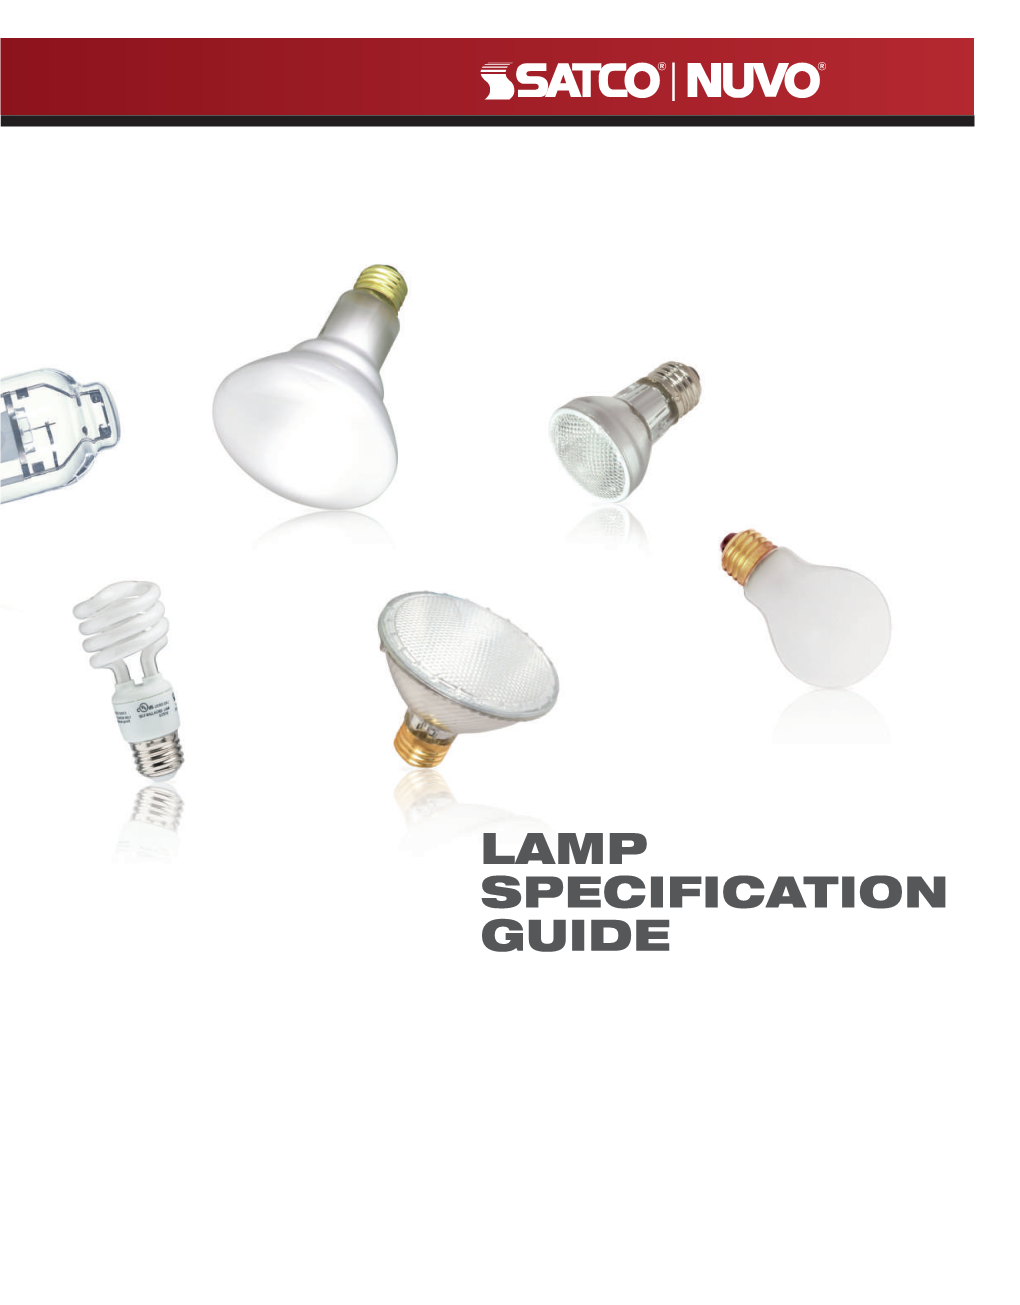 LAMP SPECIFICATION GUIDE We Are Pleased to Present the Latest Edition of Our Lamp Specification Guide